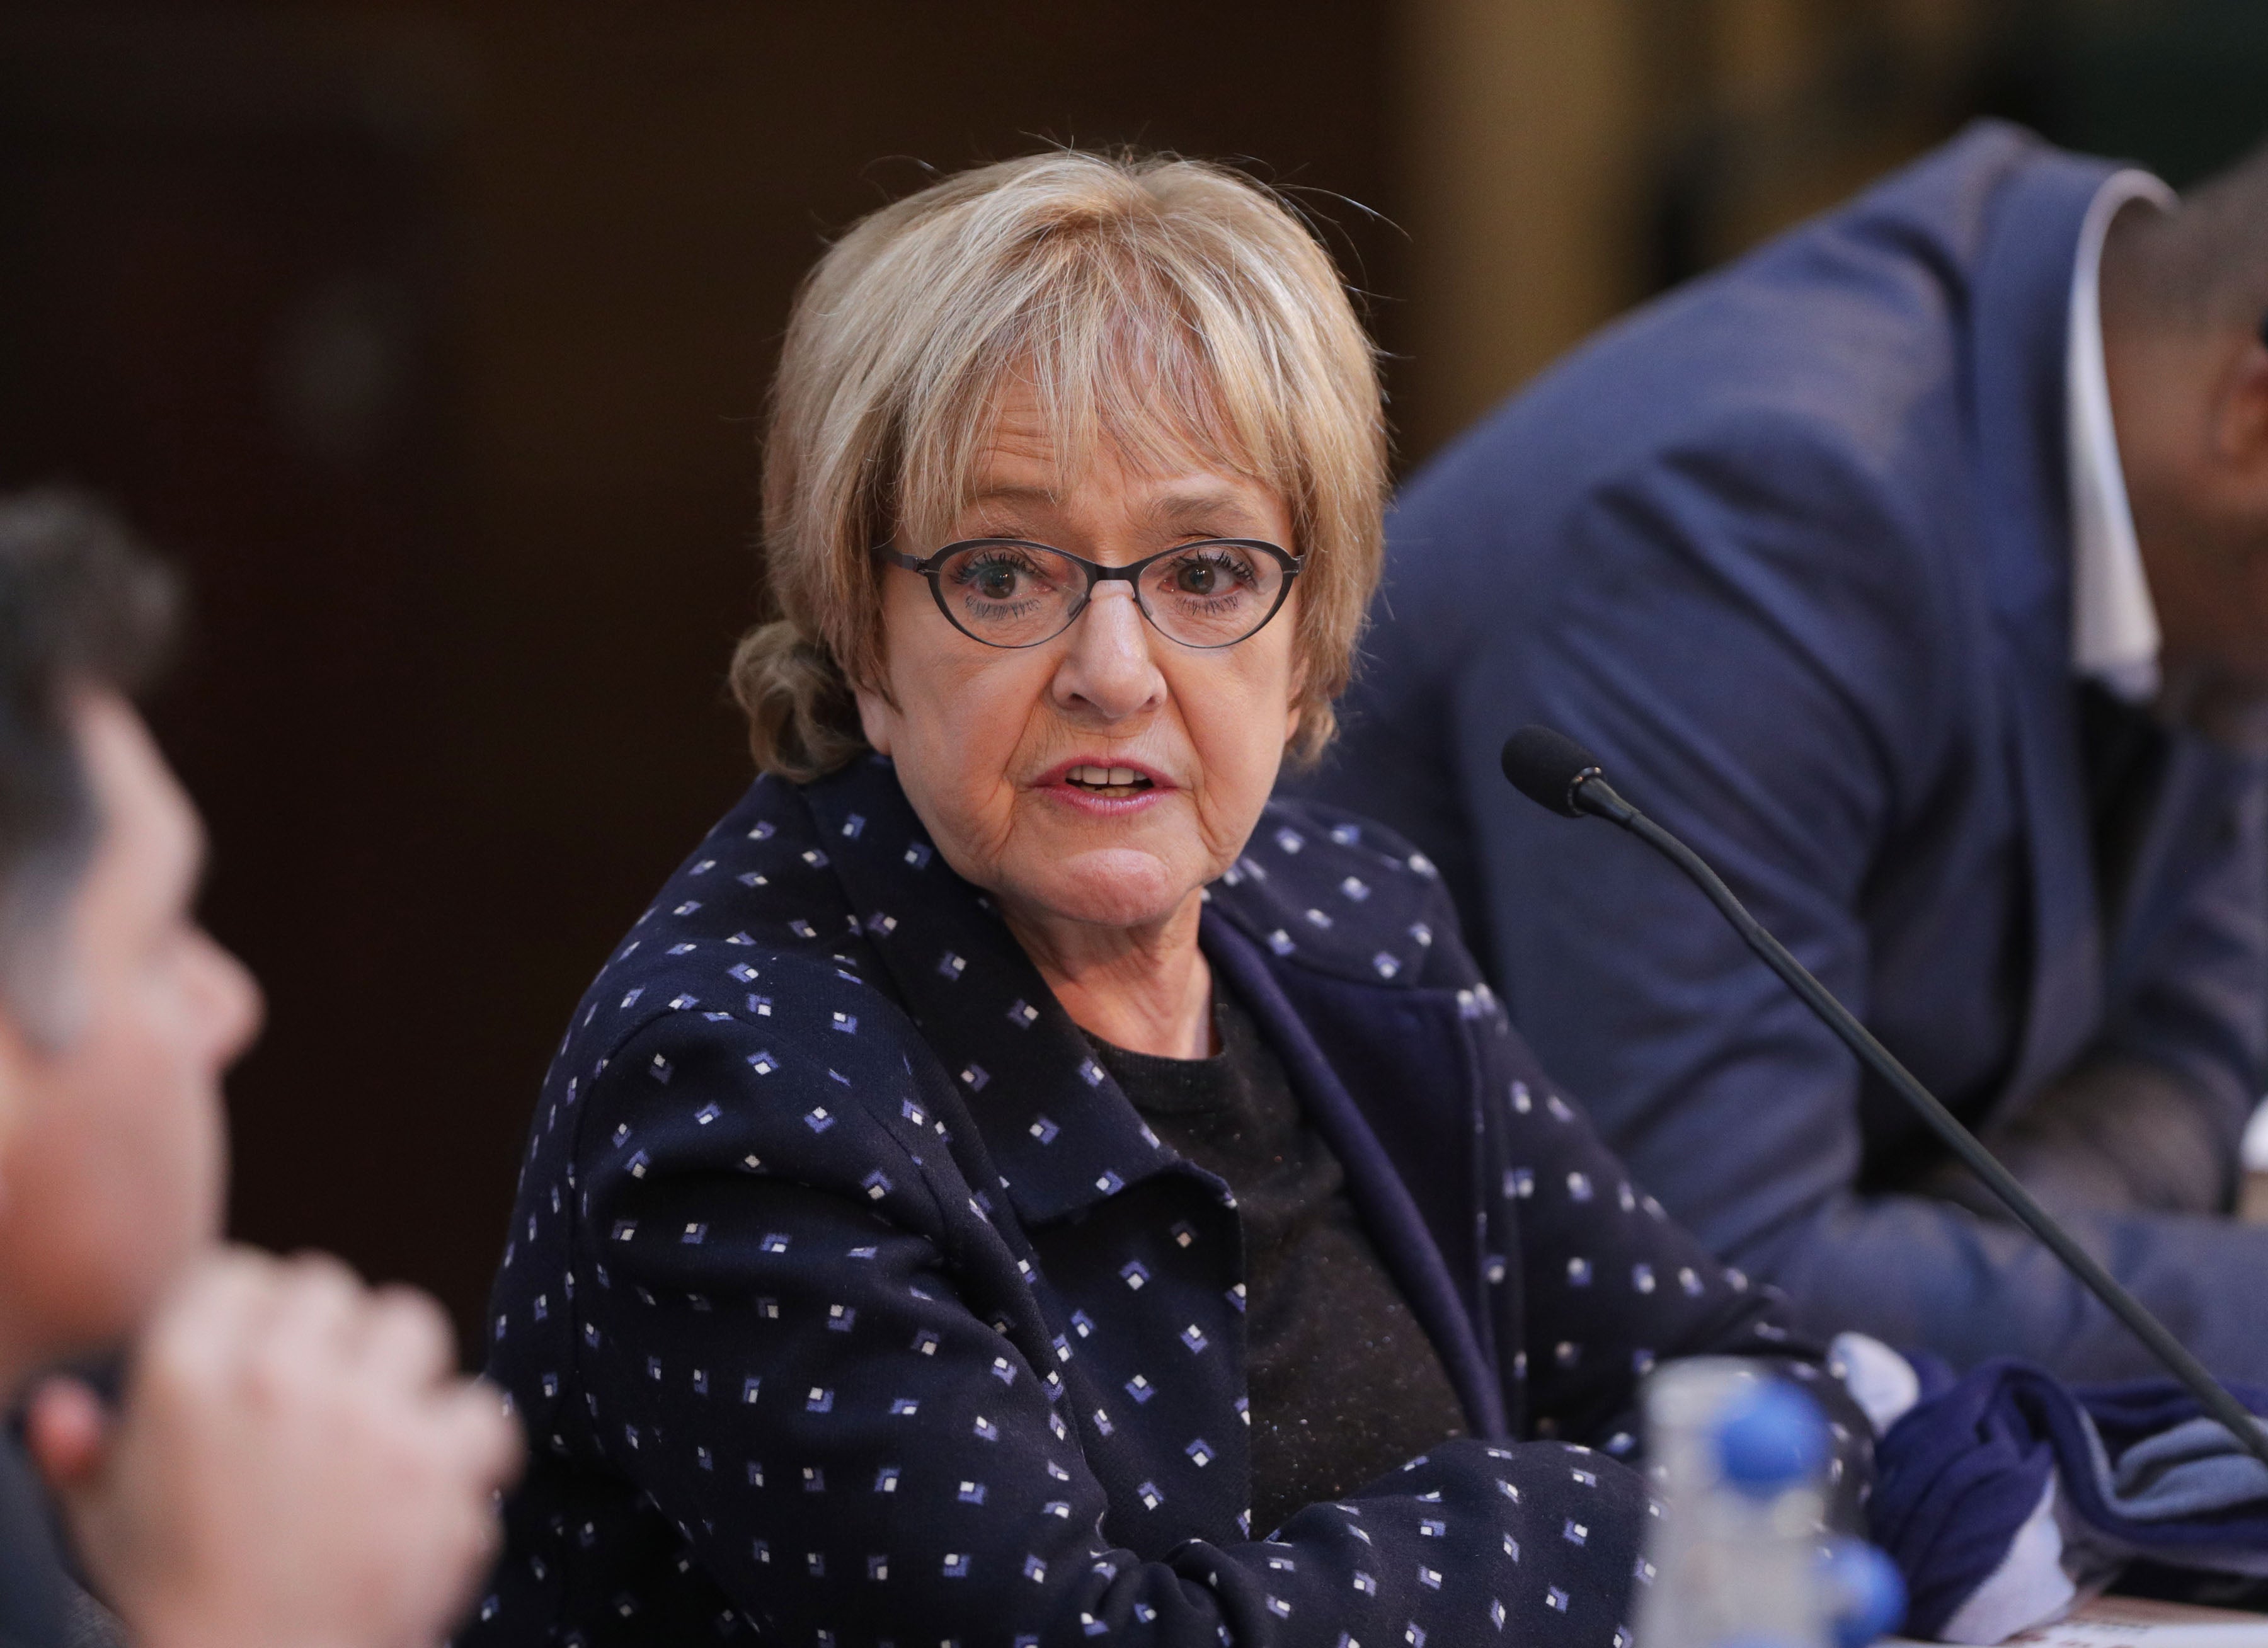 ‘That anti-woke culture has allowed this sort of behaviour to be seen as the norm,’ said Barking MP Margaret Hodge